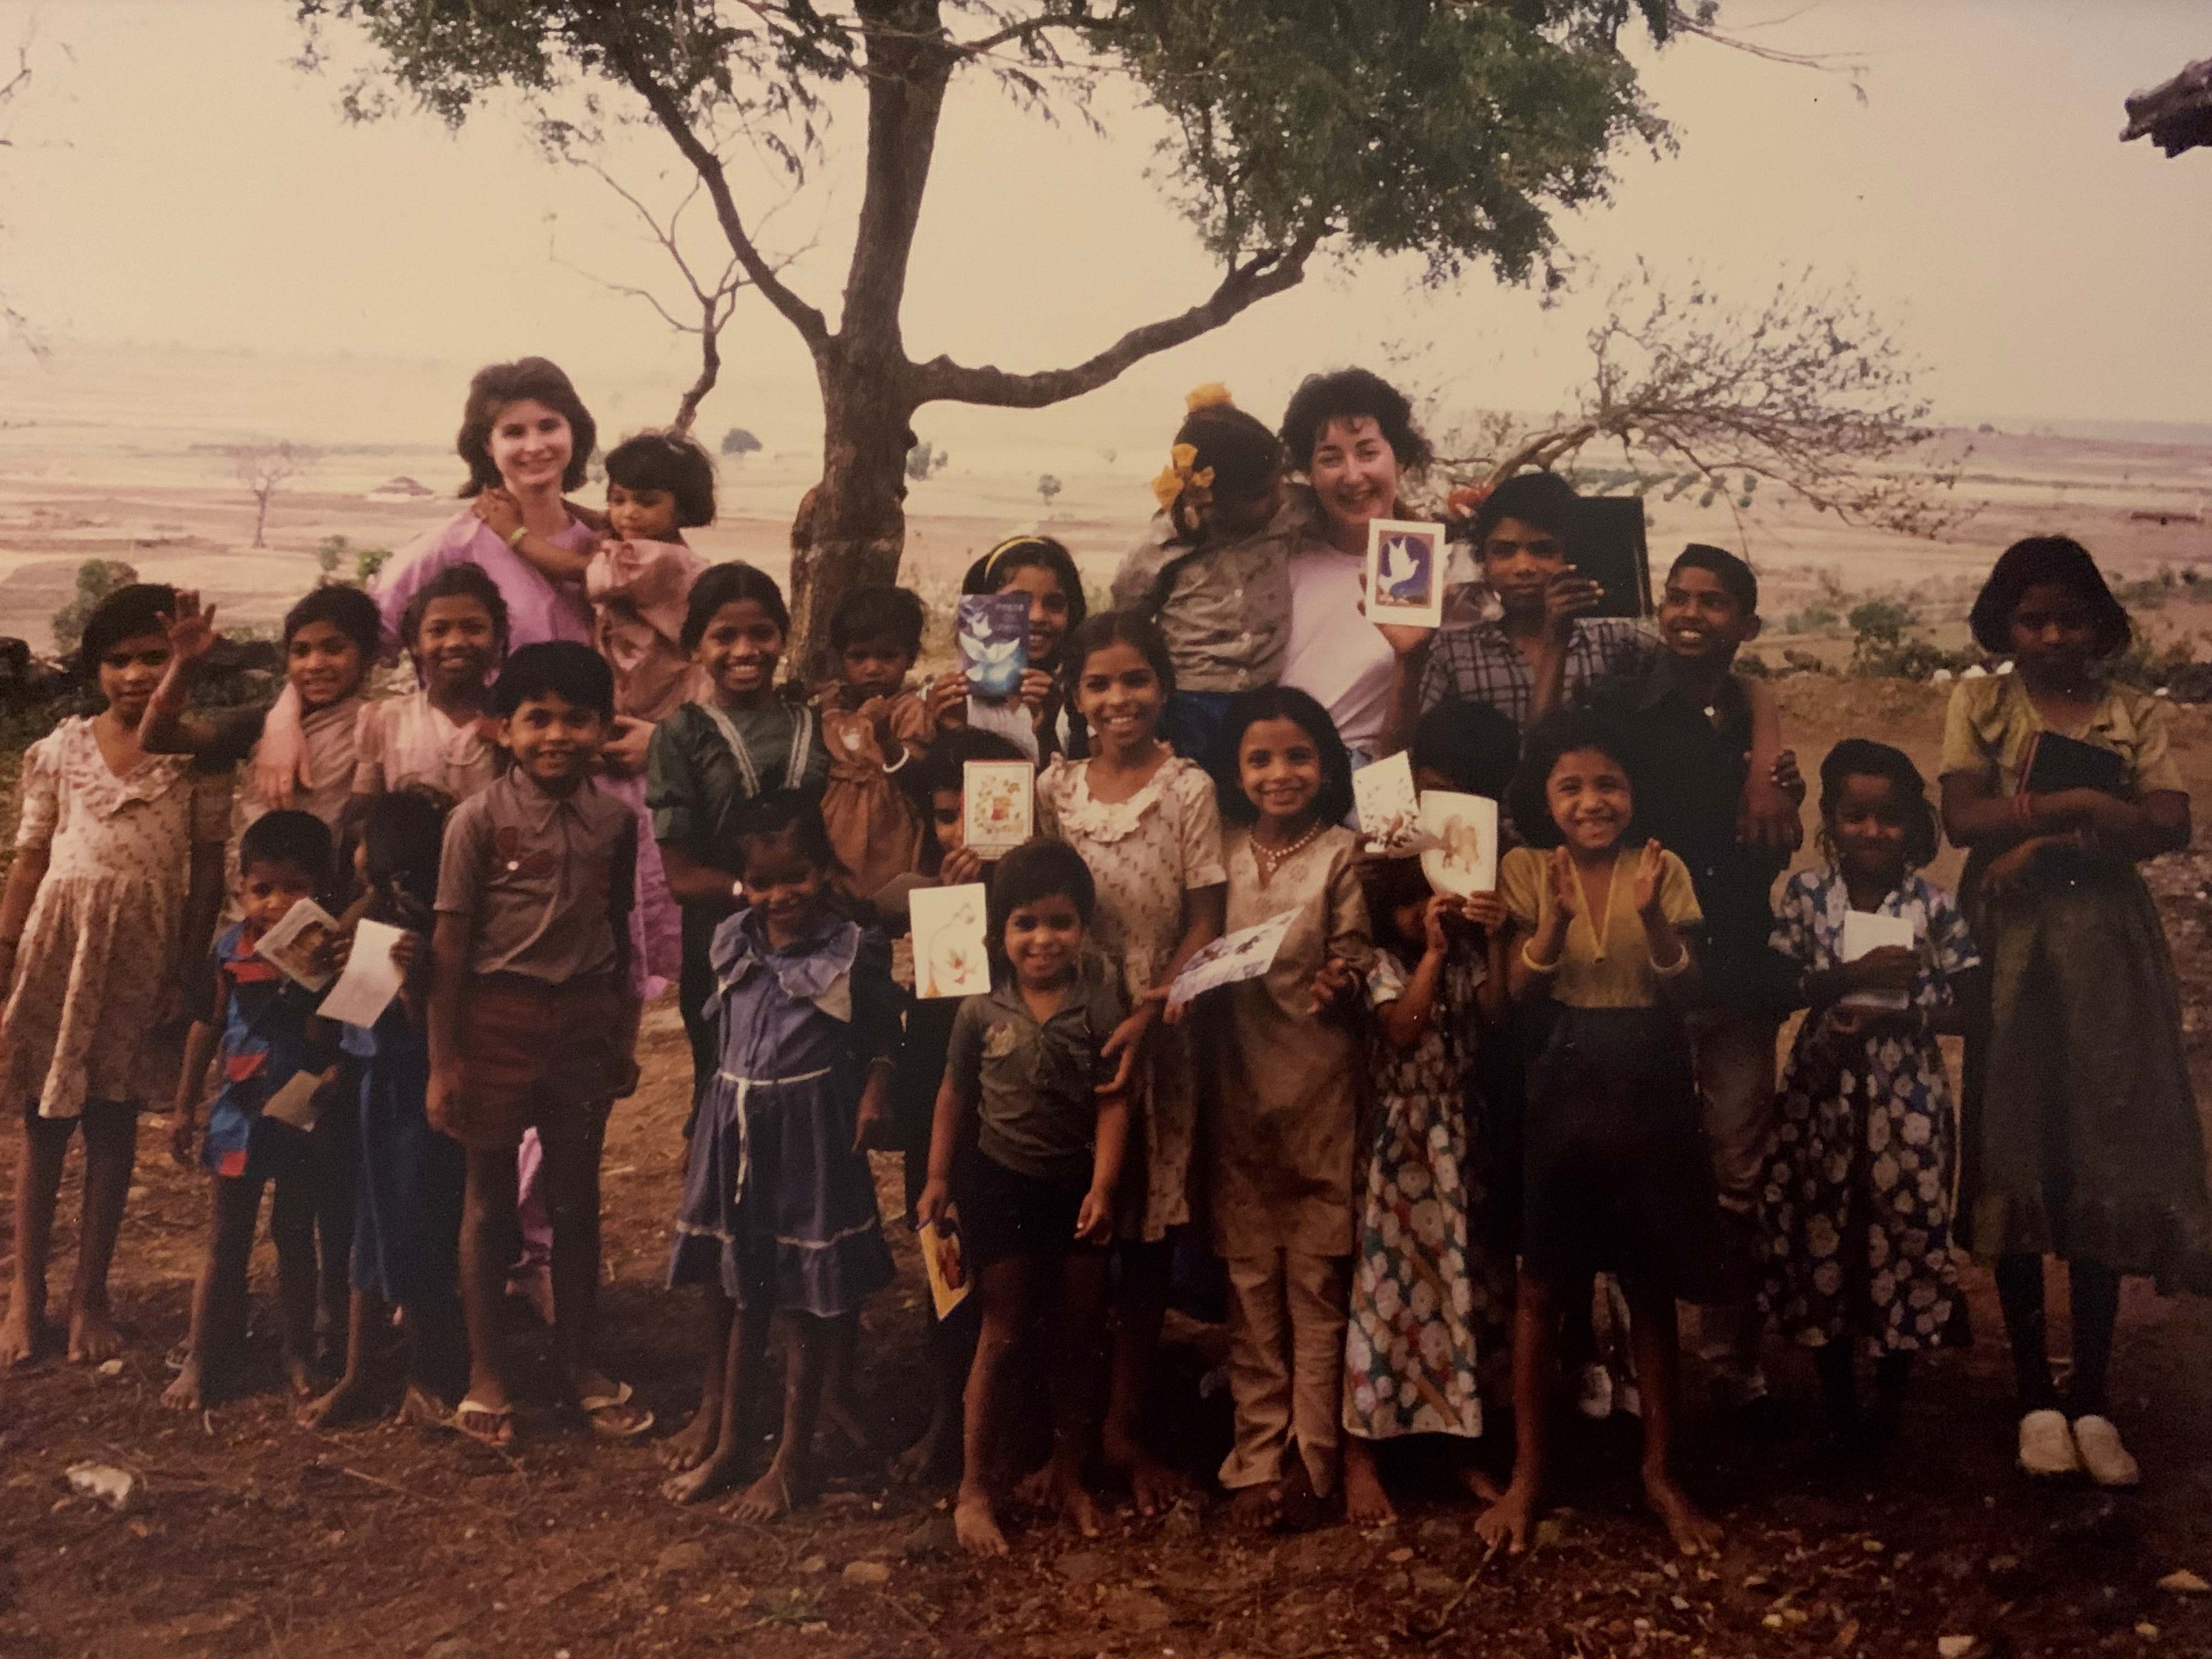 Maggie in India where she enjoyed first experiences of midwifery